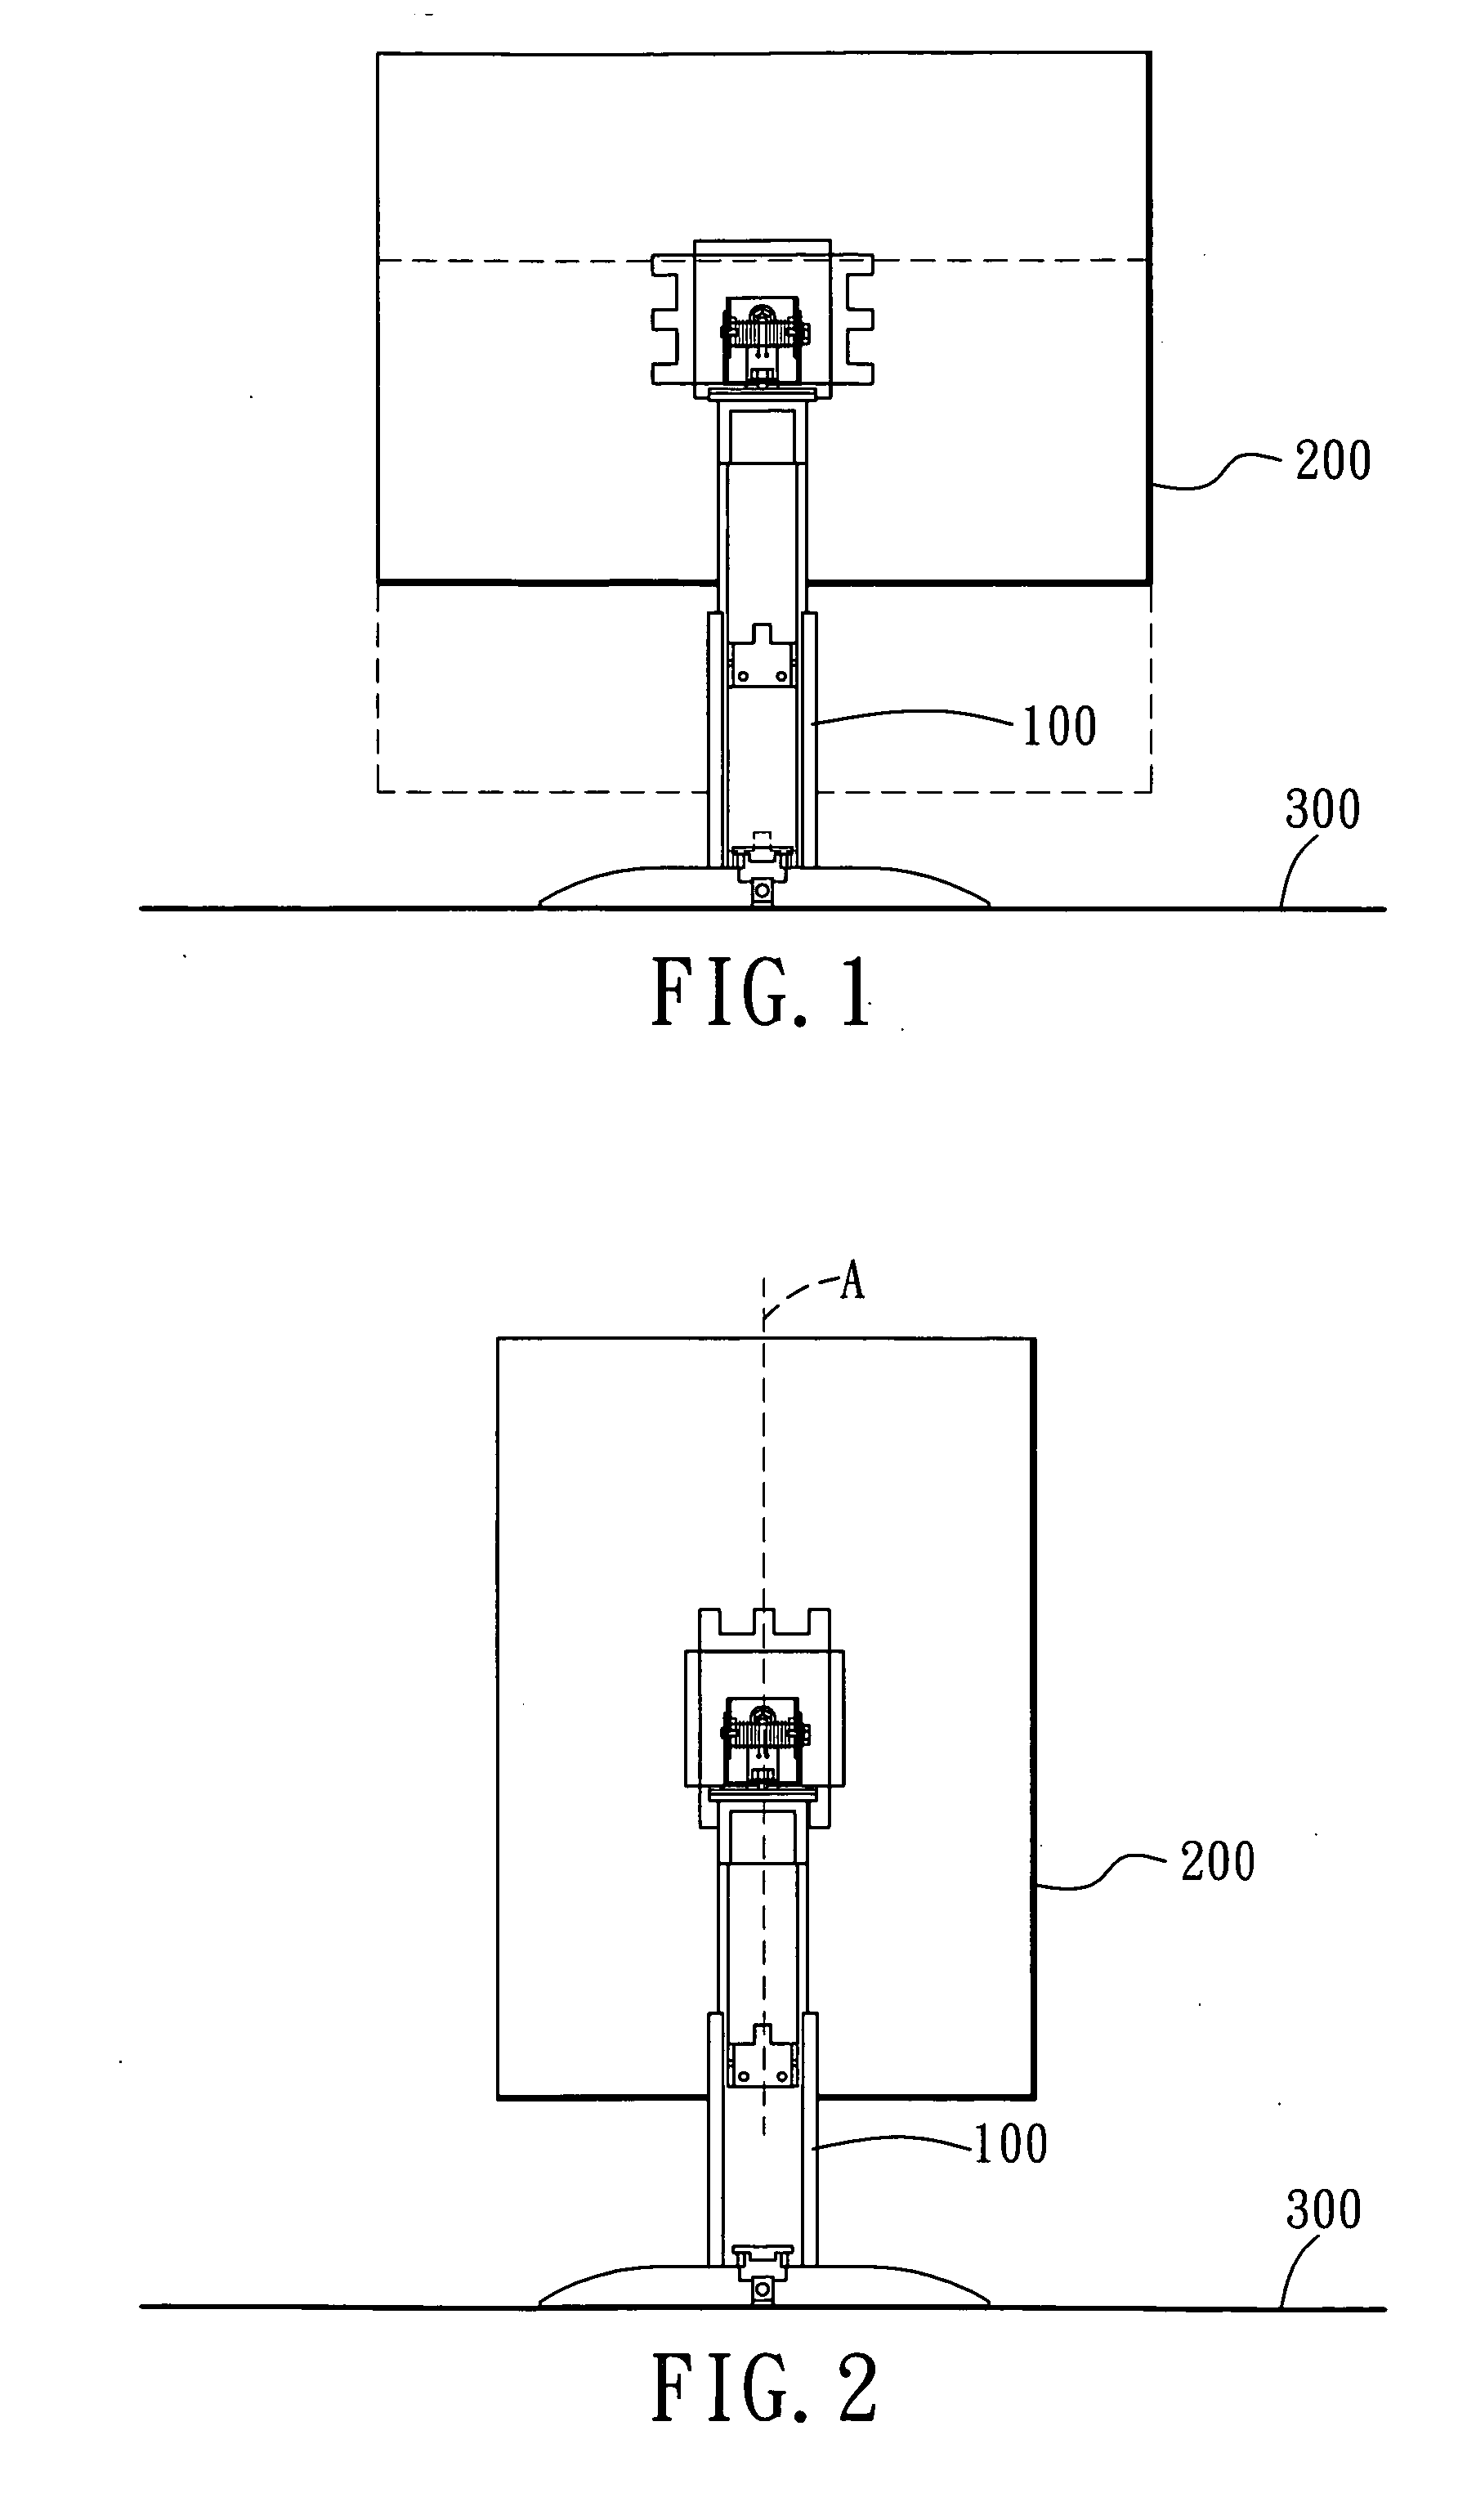 Height-adjustable support for a display device